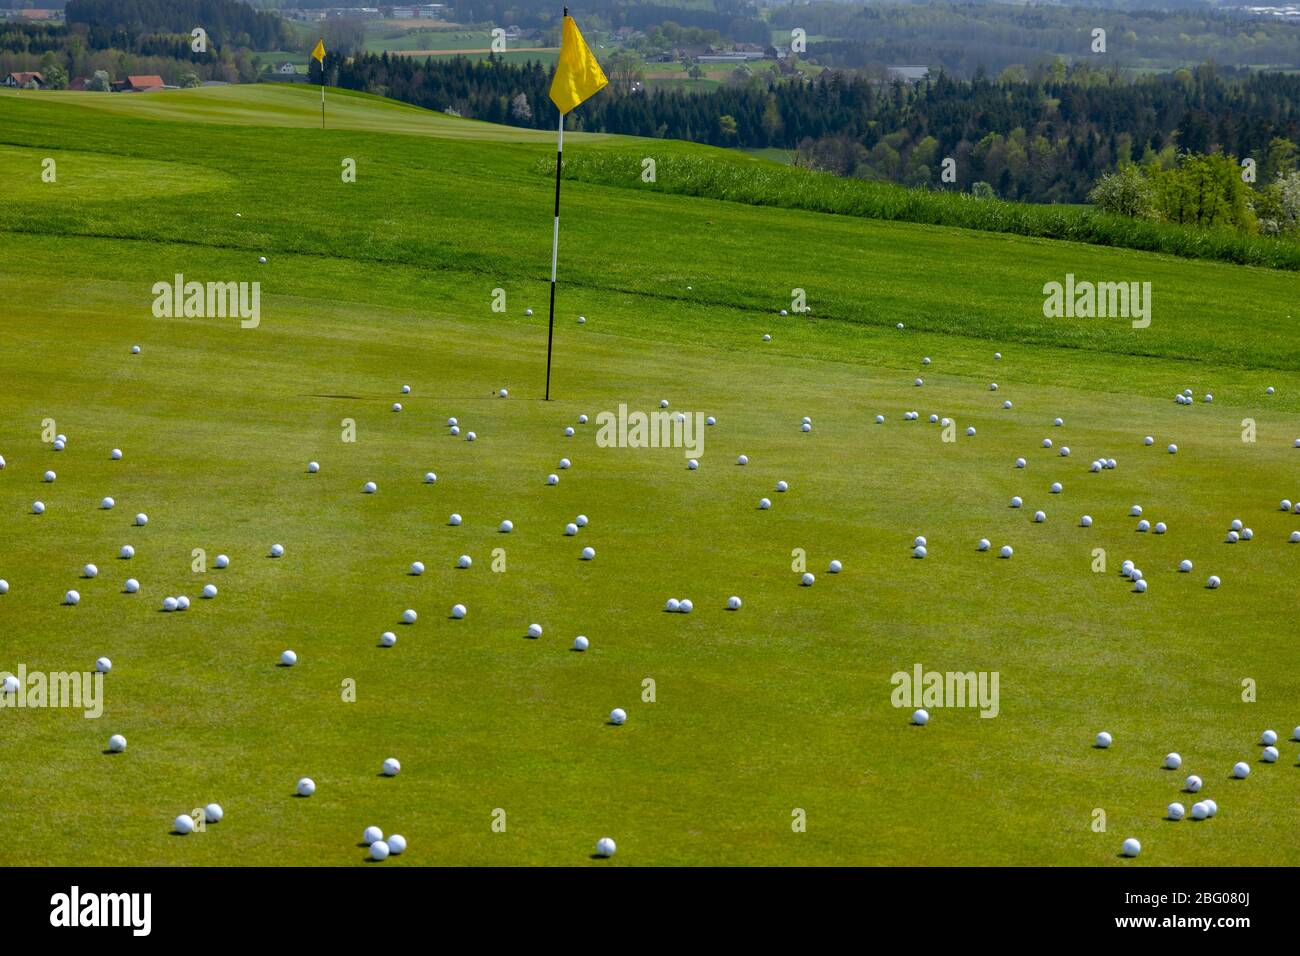 Golf Green with Flag Stick and Many Golf Balls in Switzerland. Stock Photo